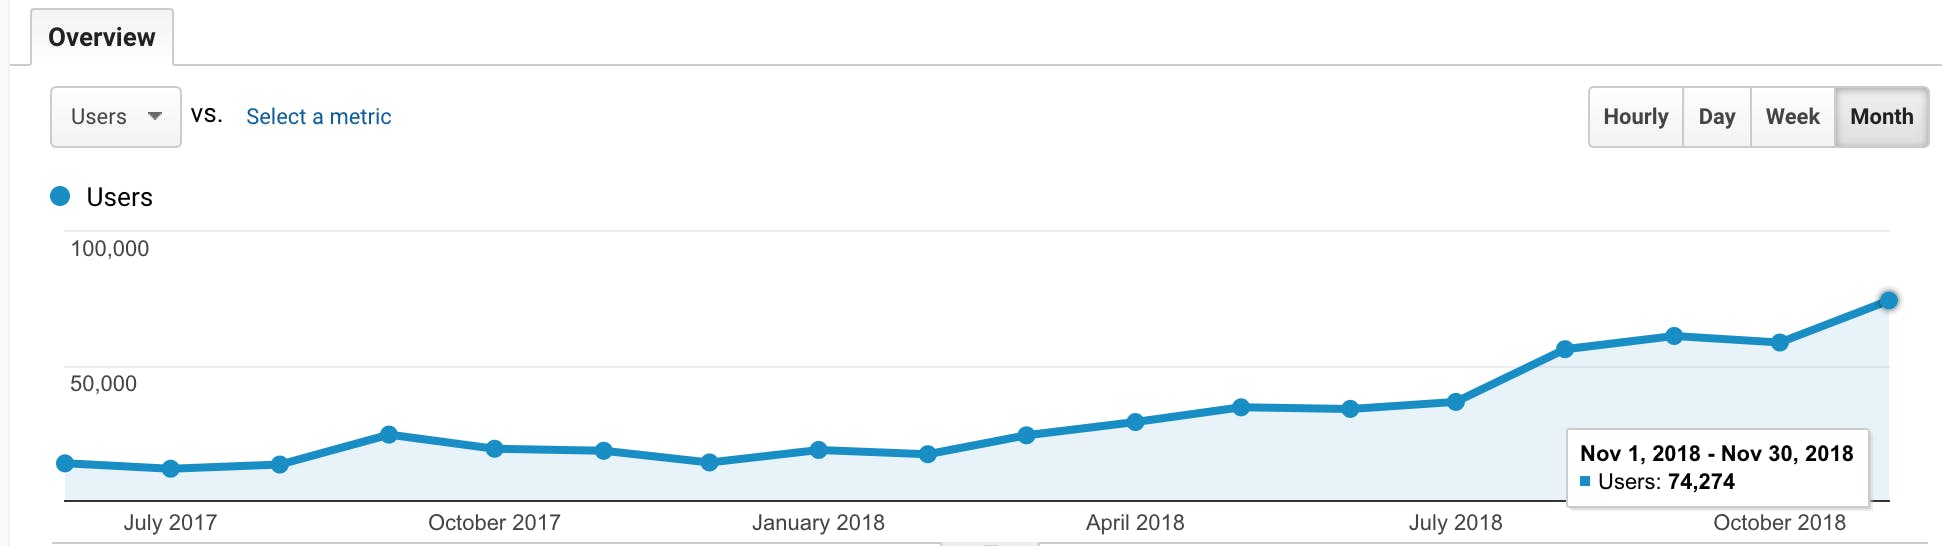 /how-we-grew-our-seo-to-70k-visitors-a-month-e6ea34ce1555 feature image